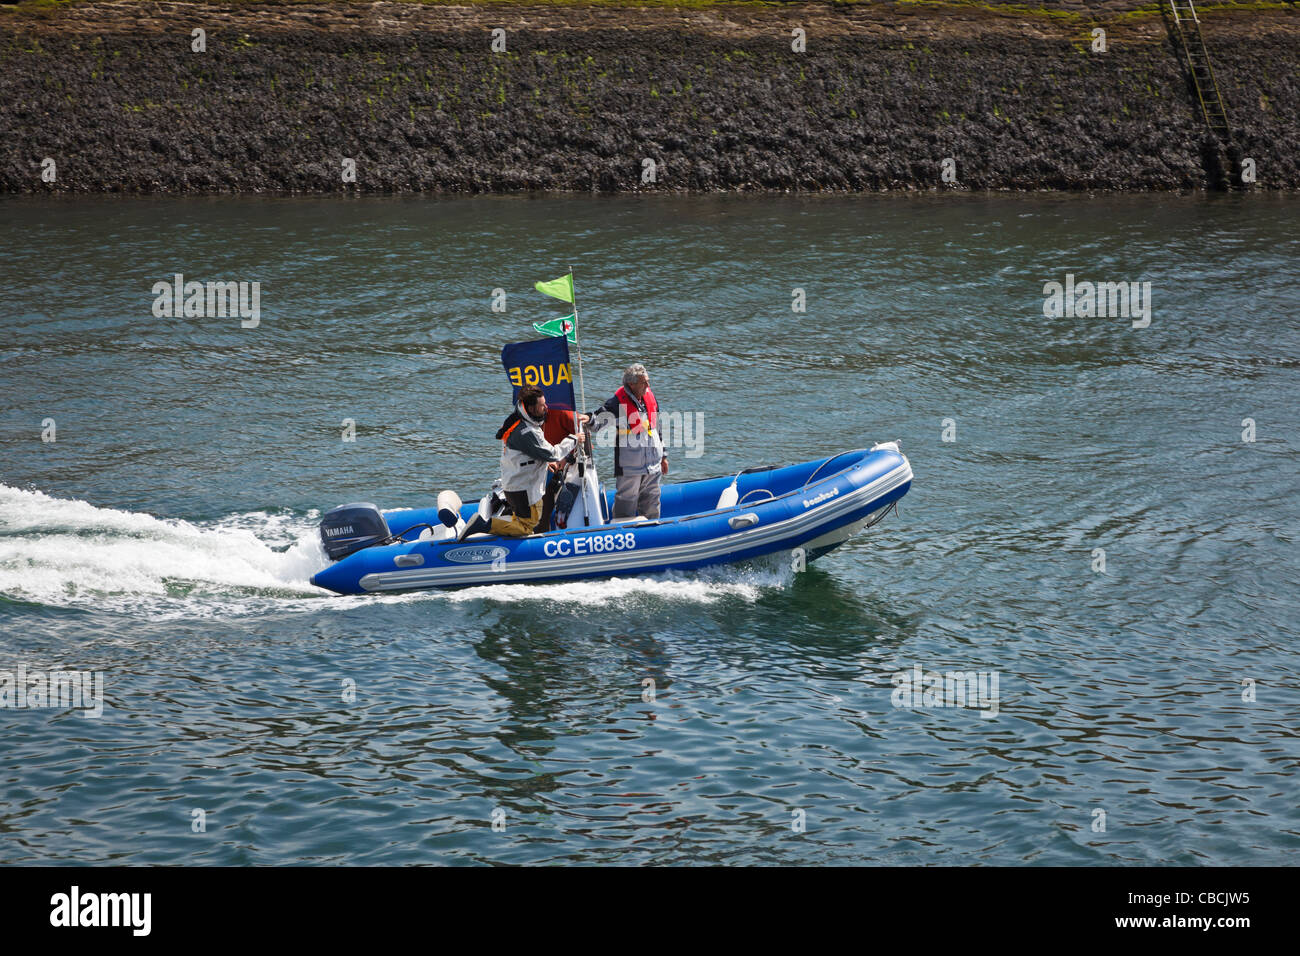 Blue dingy at Concarneau, Brittany, France Stock Photo